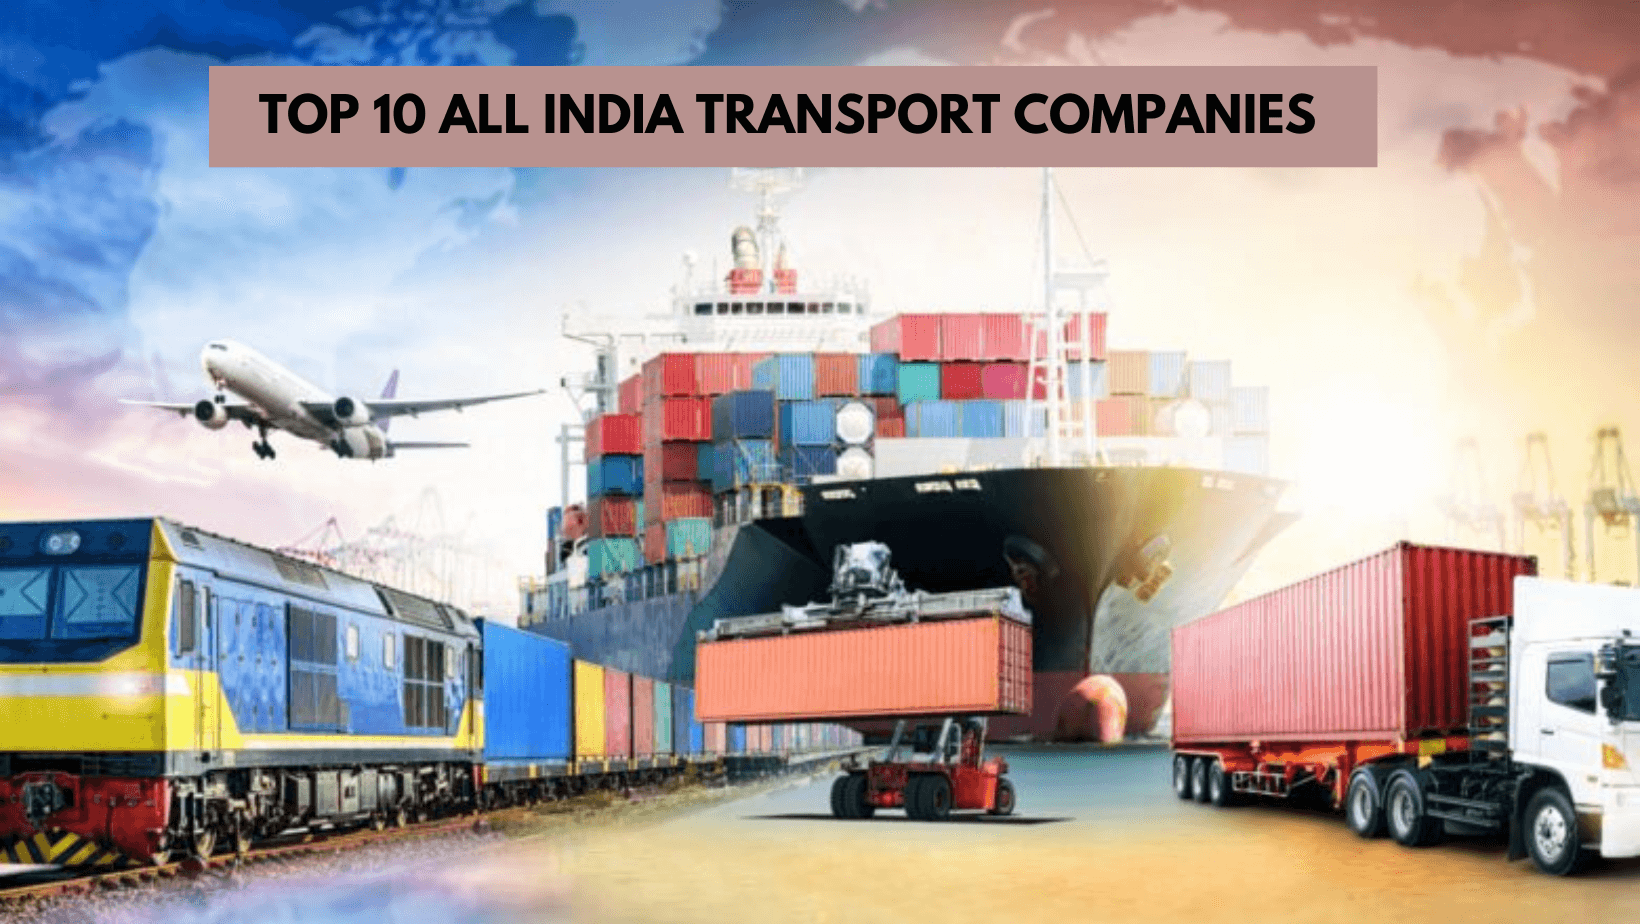 Top 10 Transport Companies in India: The Best of the Best